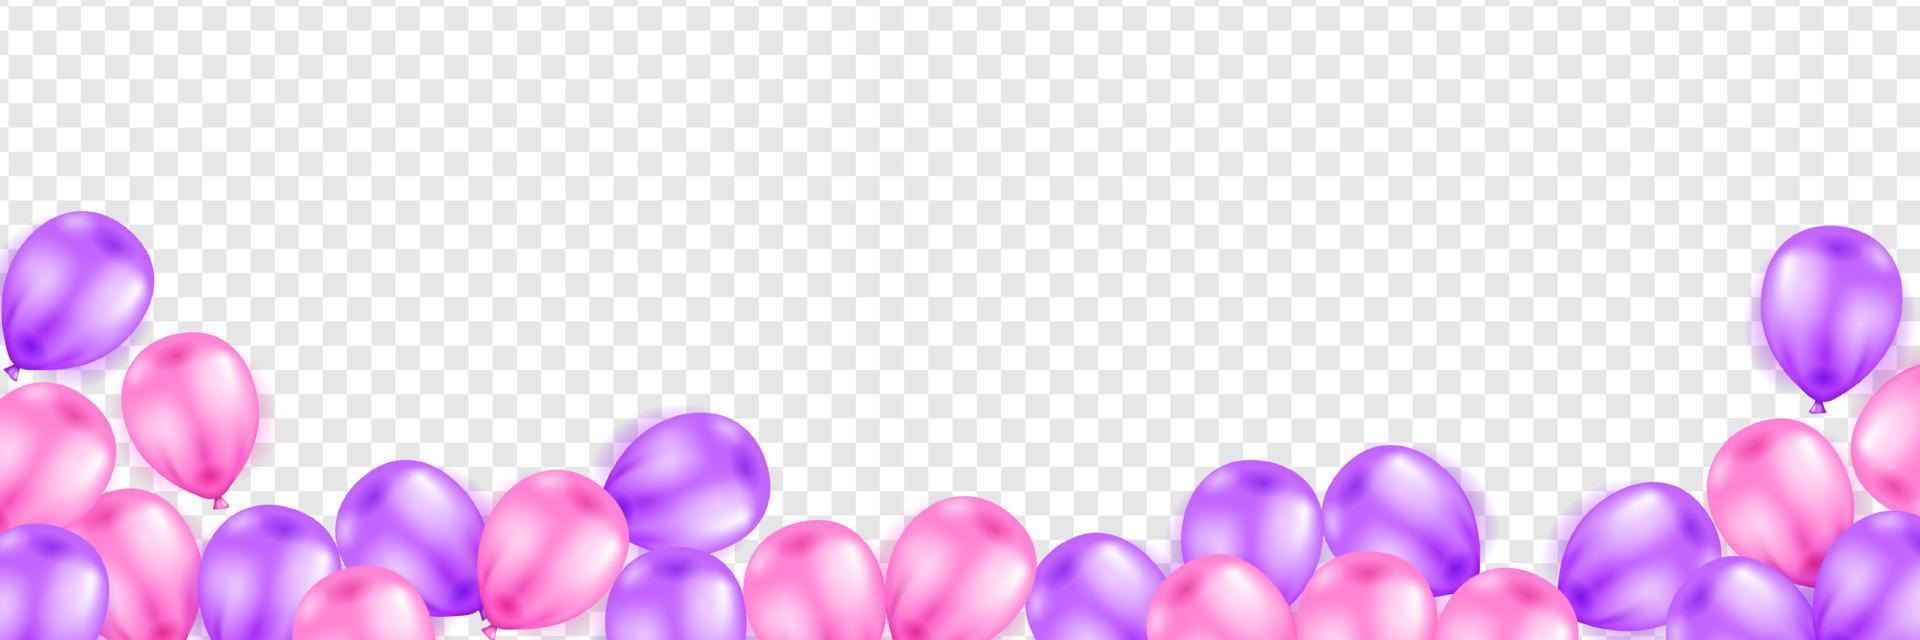 Happy birthday background design with realistic balloons vector